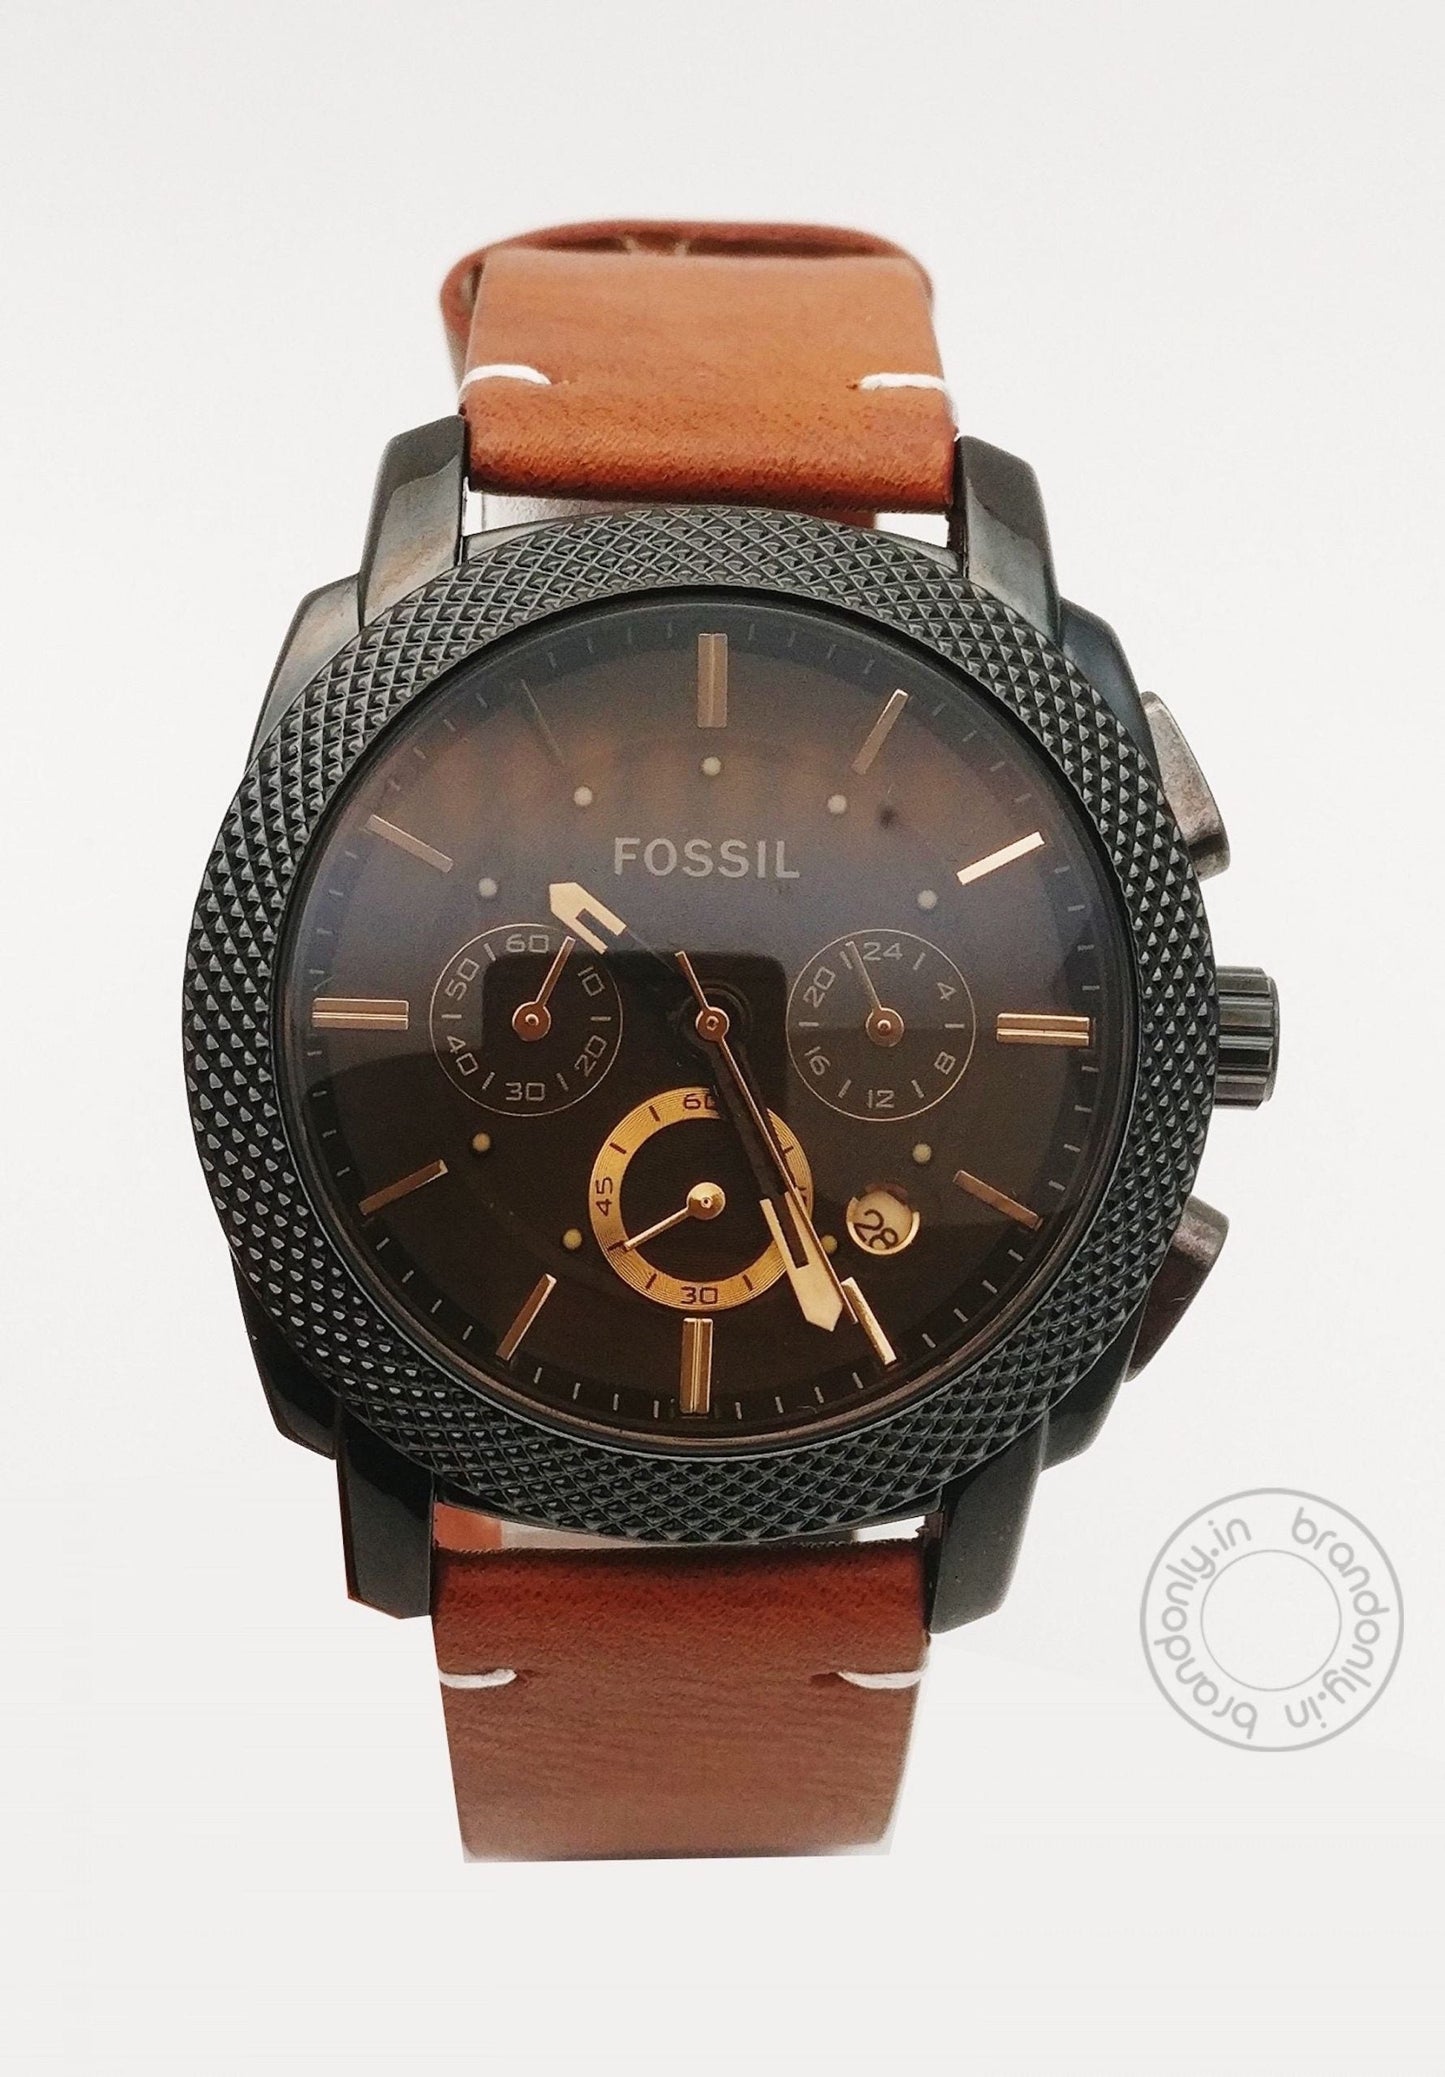 Fossil Chronograph Black Brown Tan Leather Men's Watch For Man Metal Casual Formal Gift Fs7070